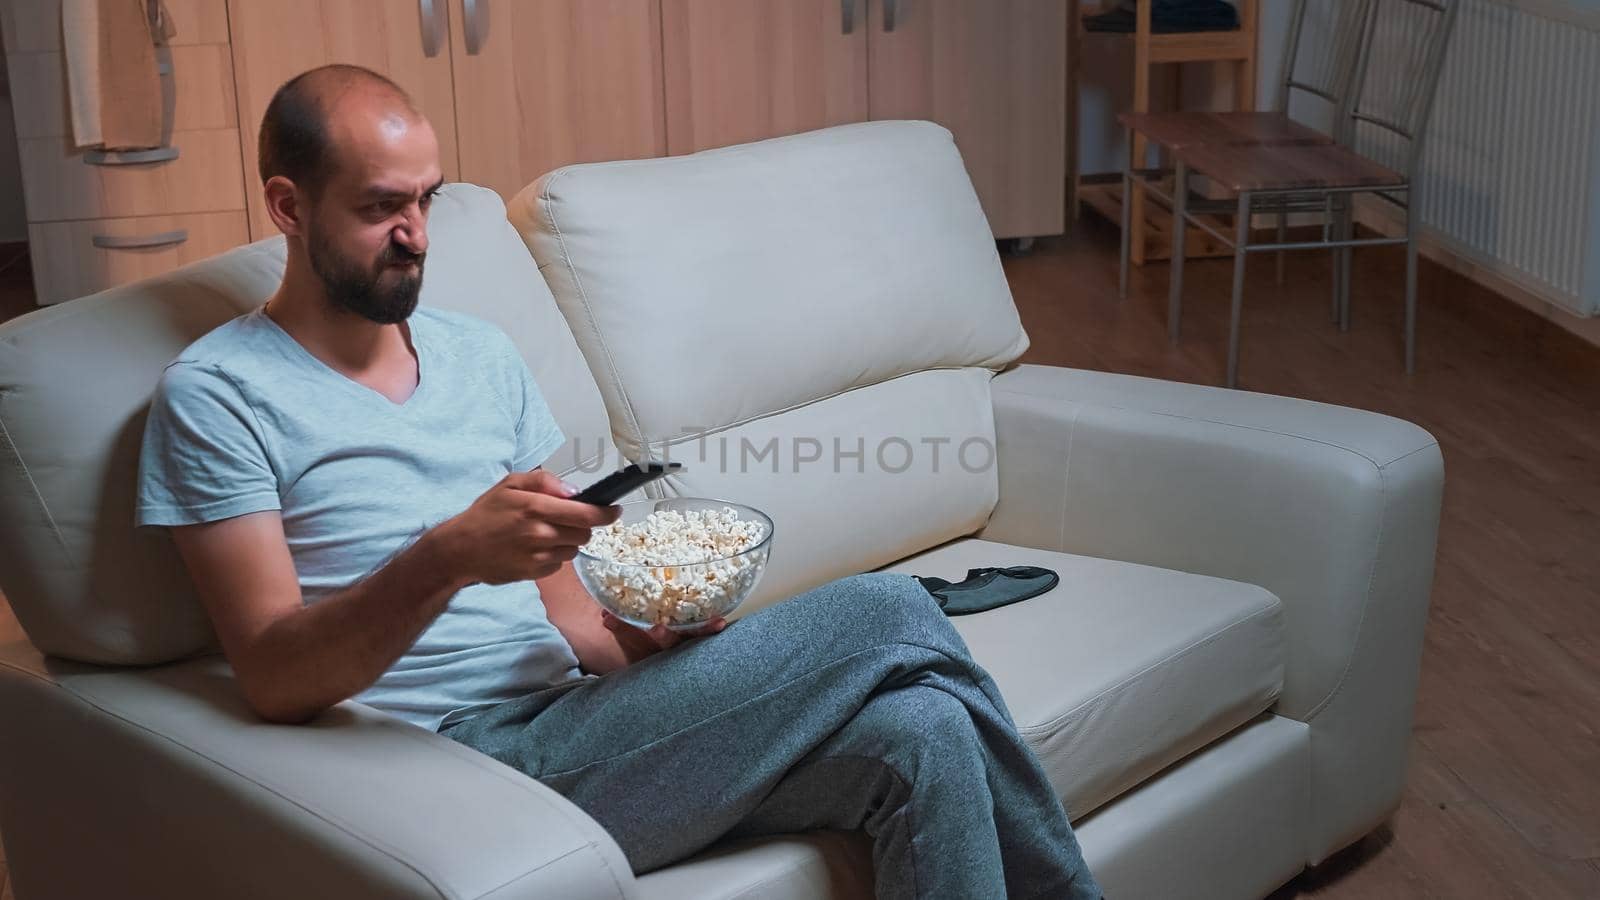 Concentrated man sitting in front of television using control remote by DCStudio